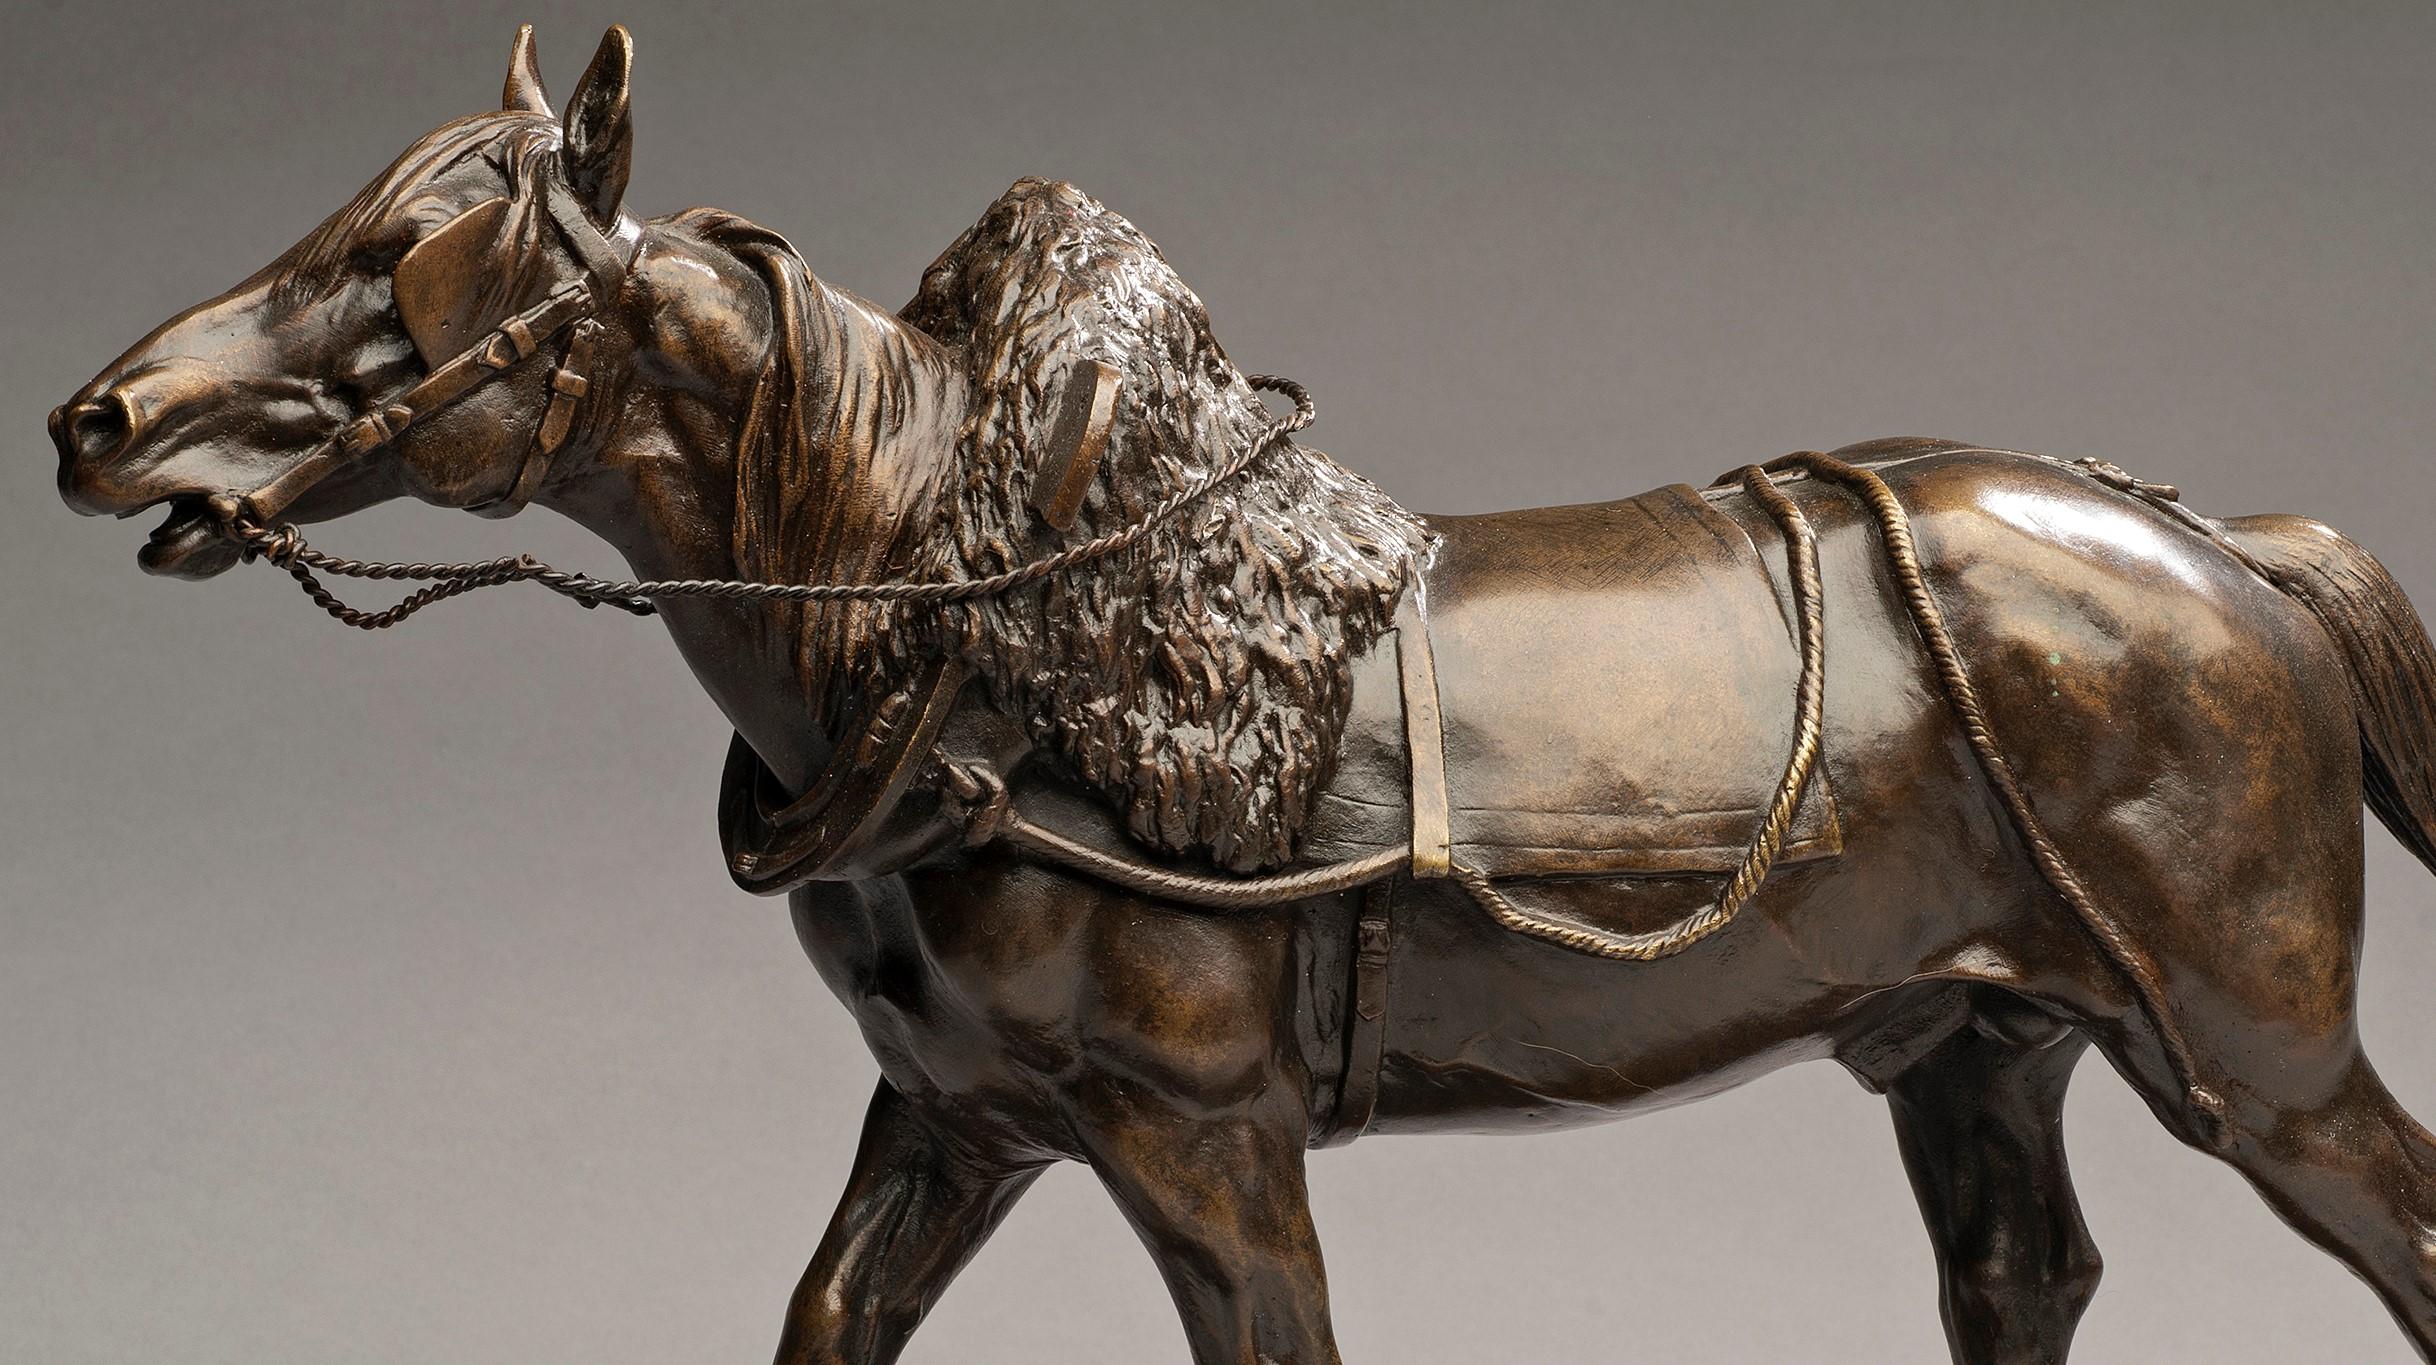 Antique Bronze Portrait of a Draft Horse
Isidore Jules Bonheur (France, 1827-1901)
Circa 1840s
Cast bronze mounted on a rectangular plinth atop a marble socle
14 1/2 x 12 1/2 (on base) inches 

This is an exquisite and powerful yet sensitive casting